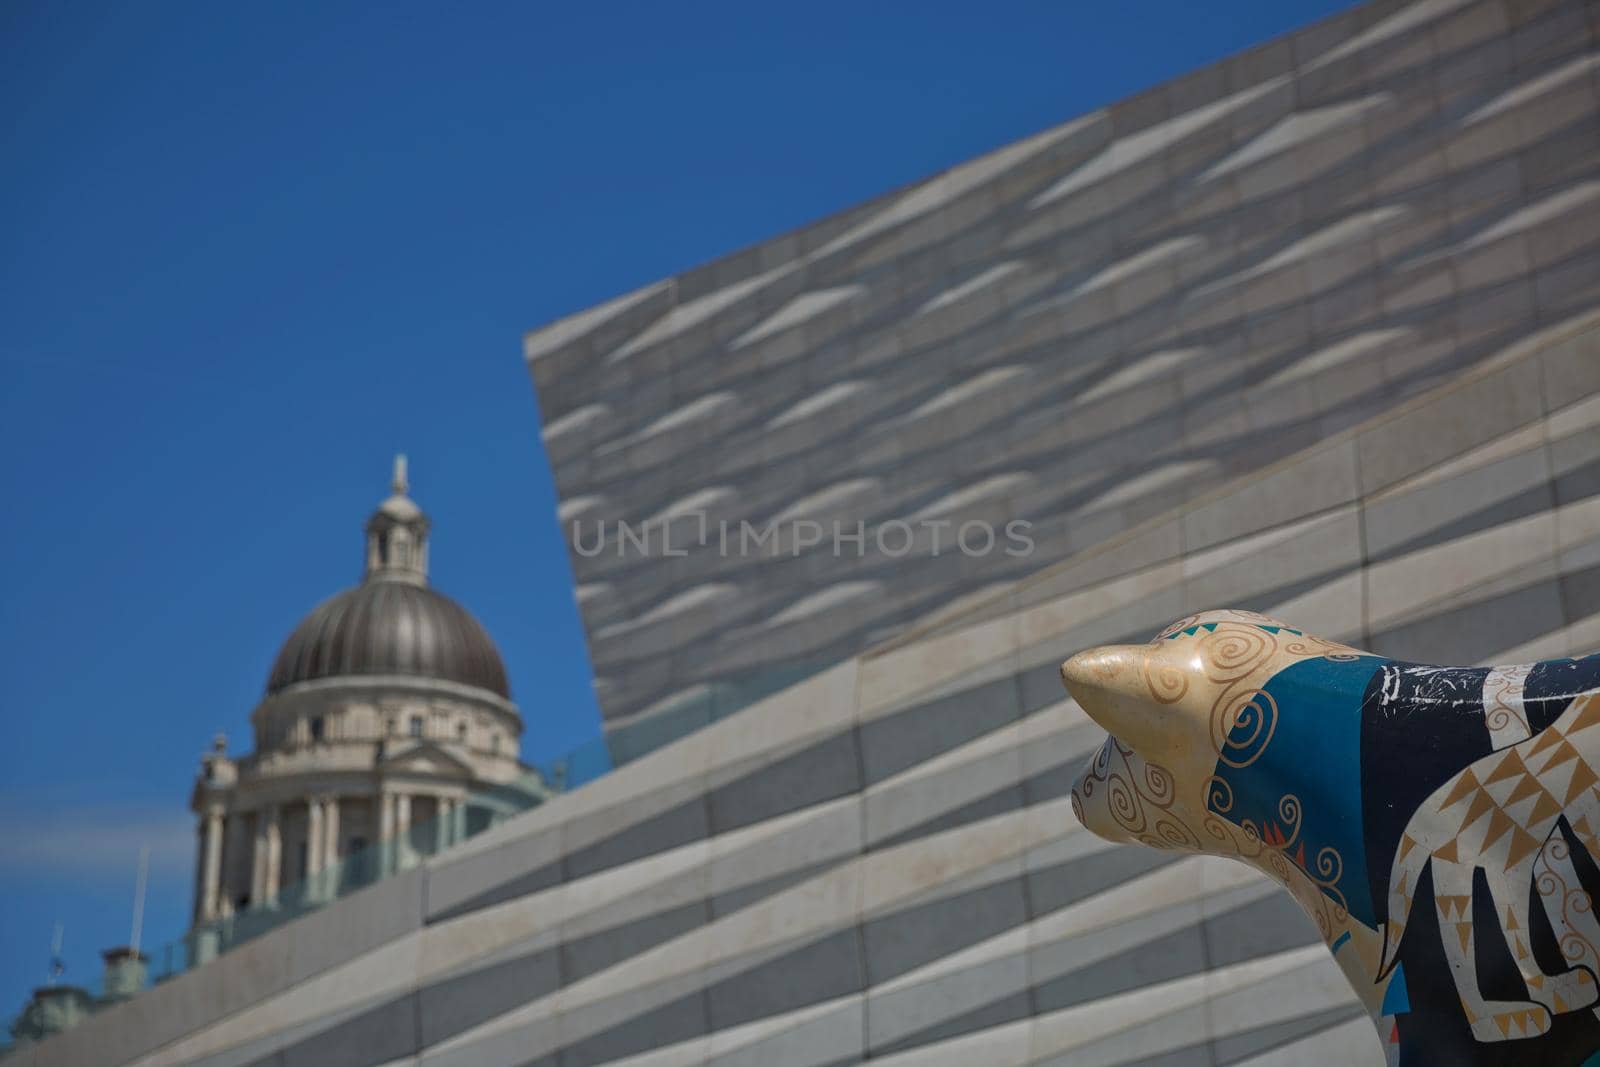 LIVERPOOL, ENGLAND, UK - JUNE 07, 2017: Port of Liverpool Building (or Dock Office) in Pier Head, along the Liverpool's waterfront, England, United Kingdom.